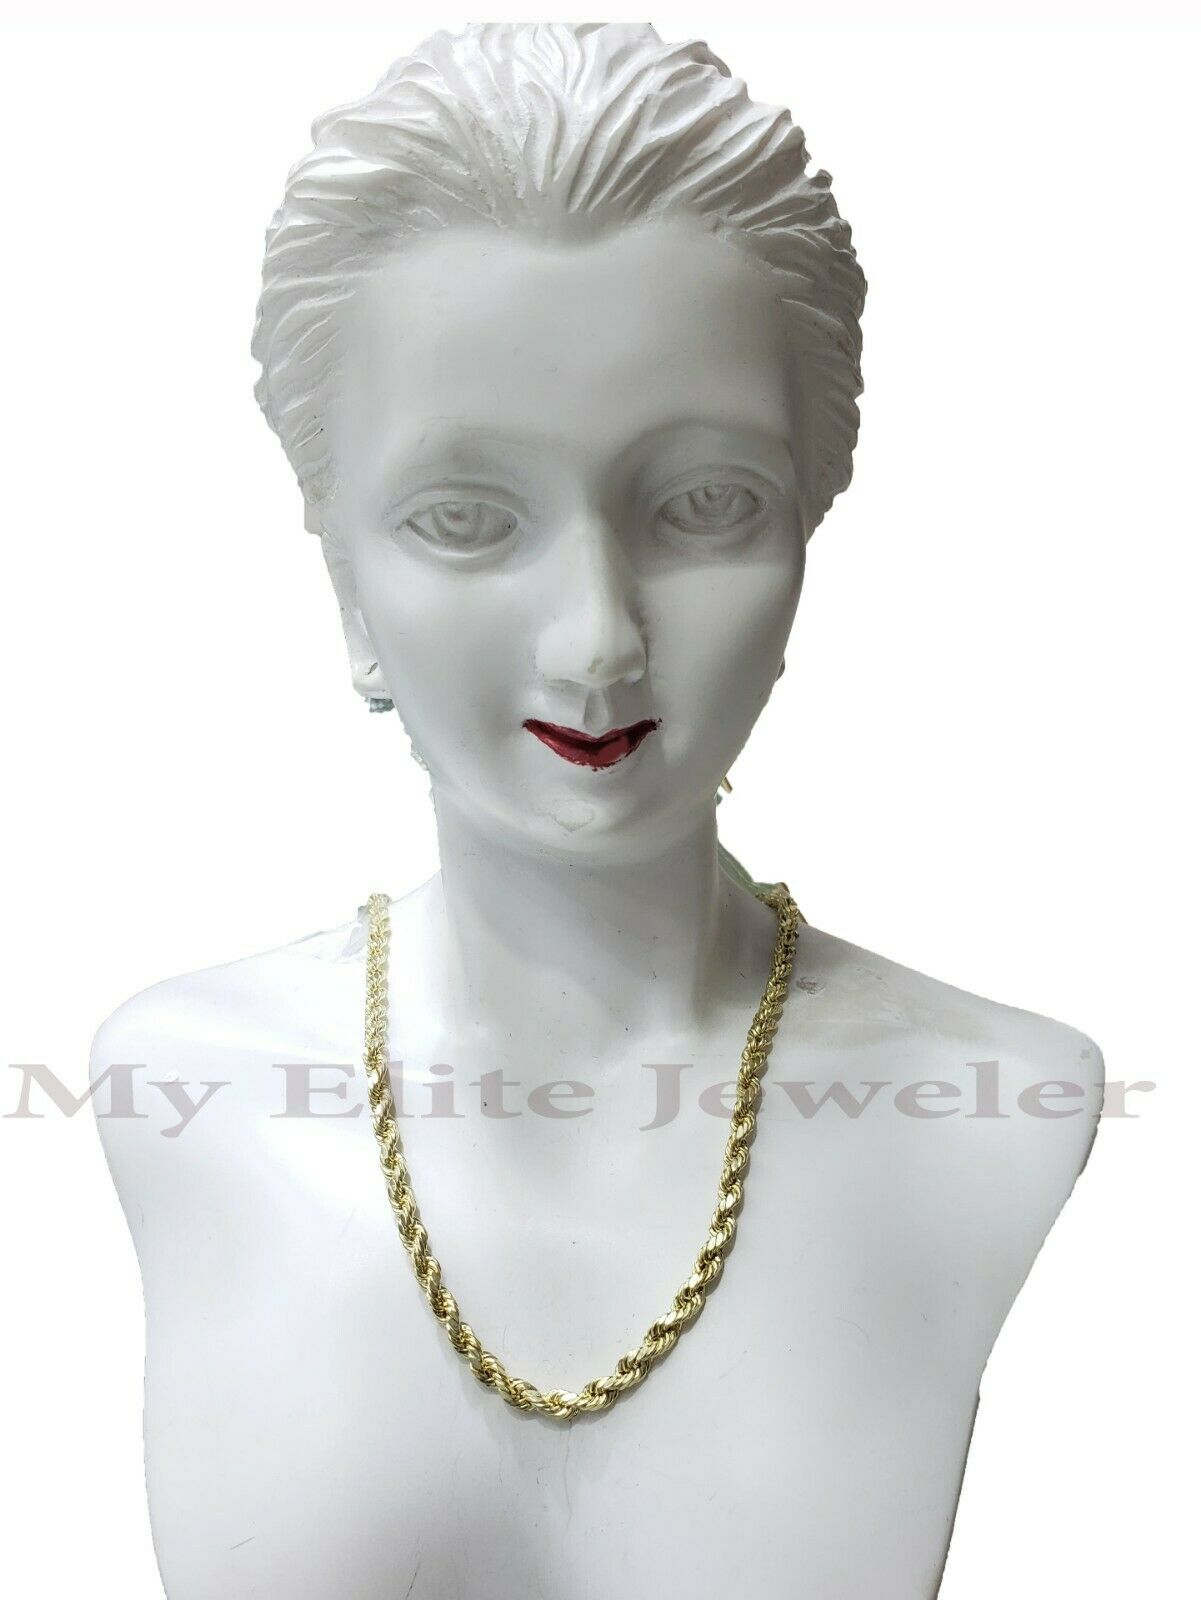 10k Yellow Gold Ladies Rope Necklace 18" Chain 3mm Women 100% REAL GOLD Bracelet